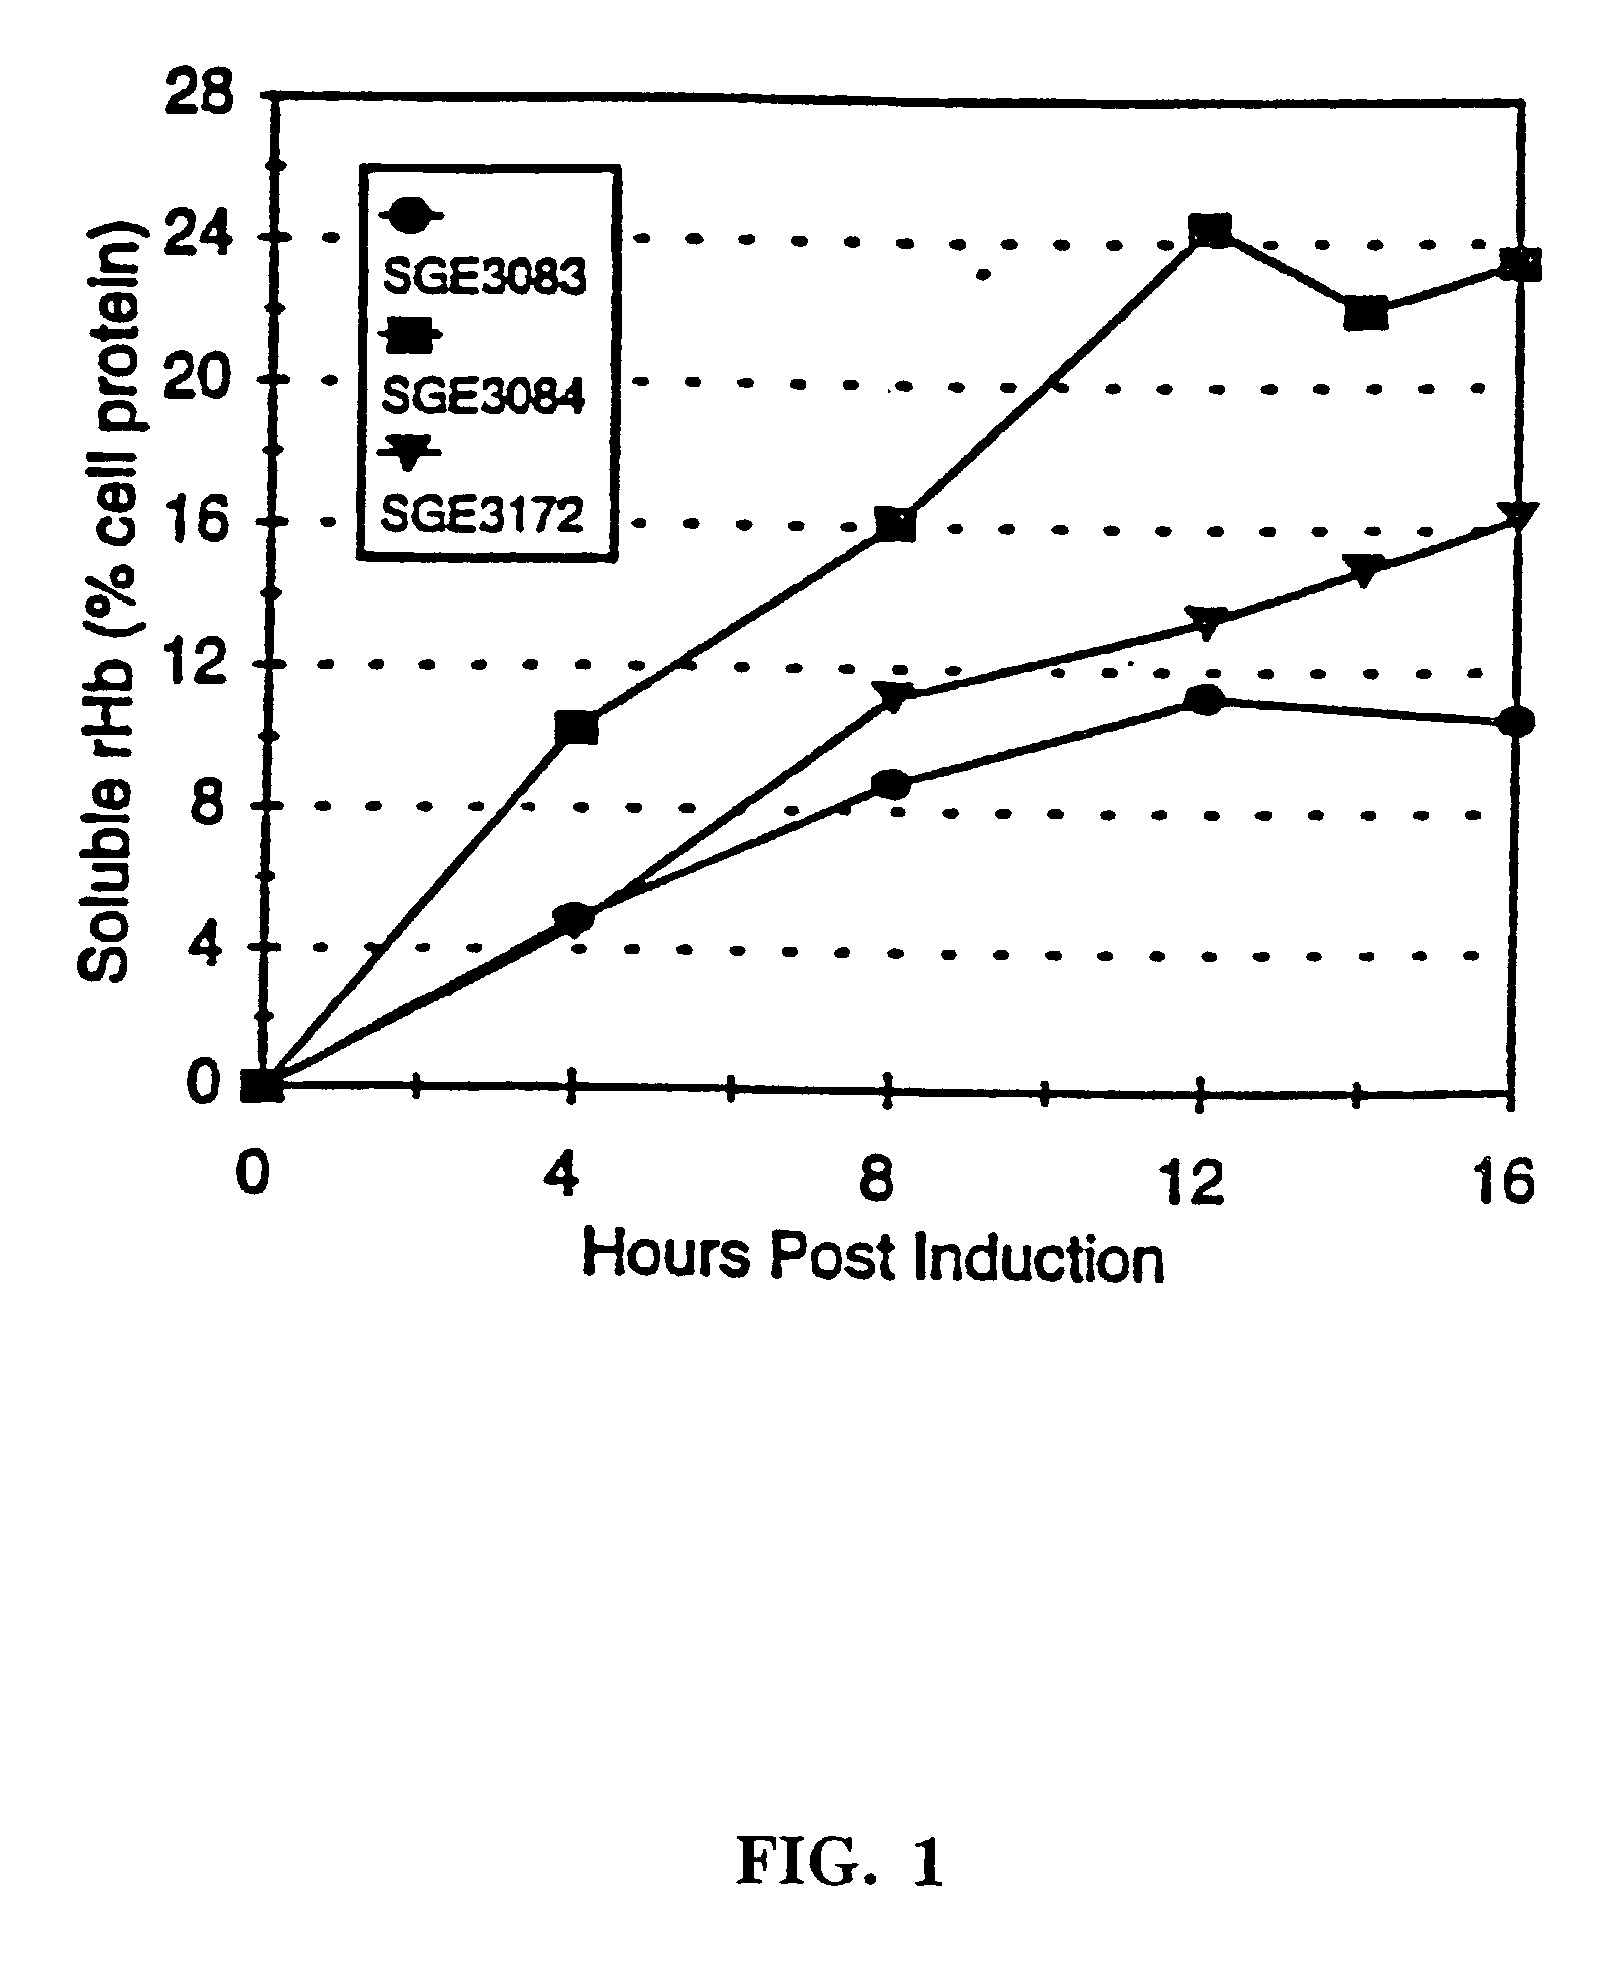 Hemoglobin mutants with increased soluble expression and/or reduced nitric oxide scavenging